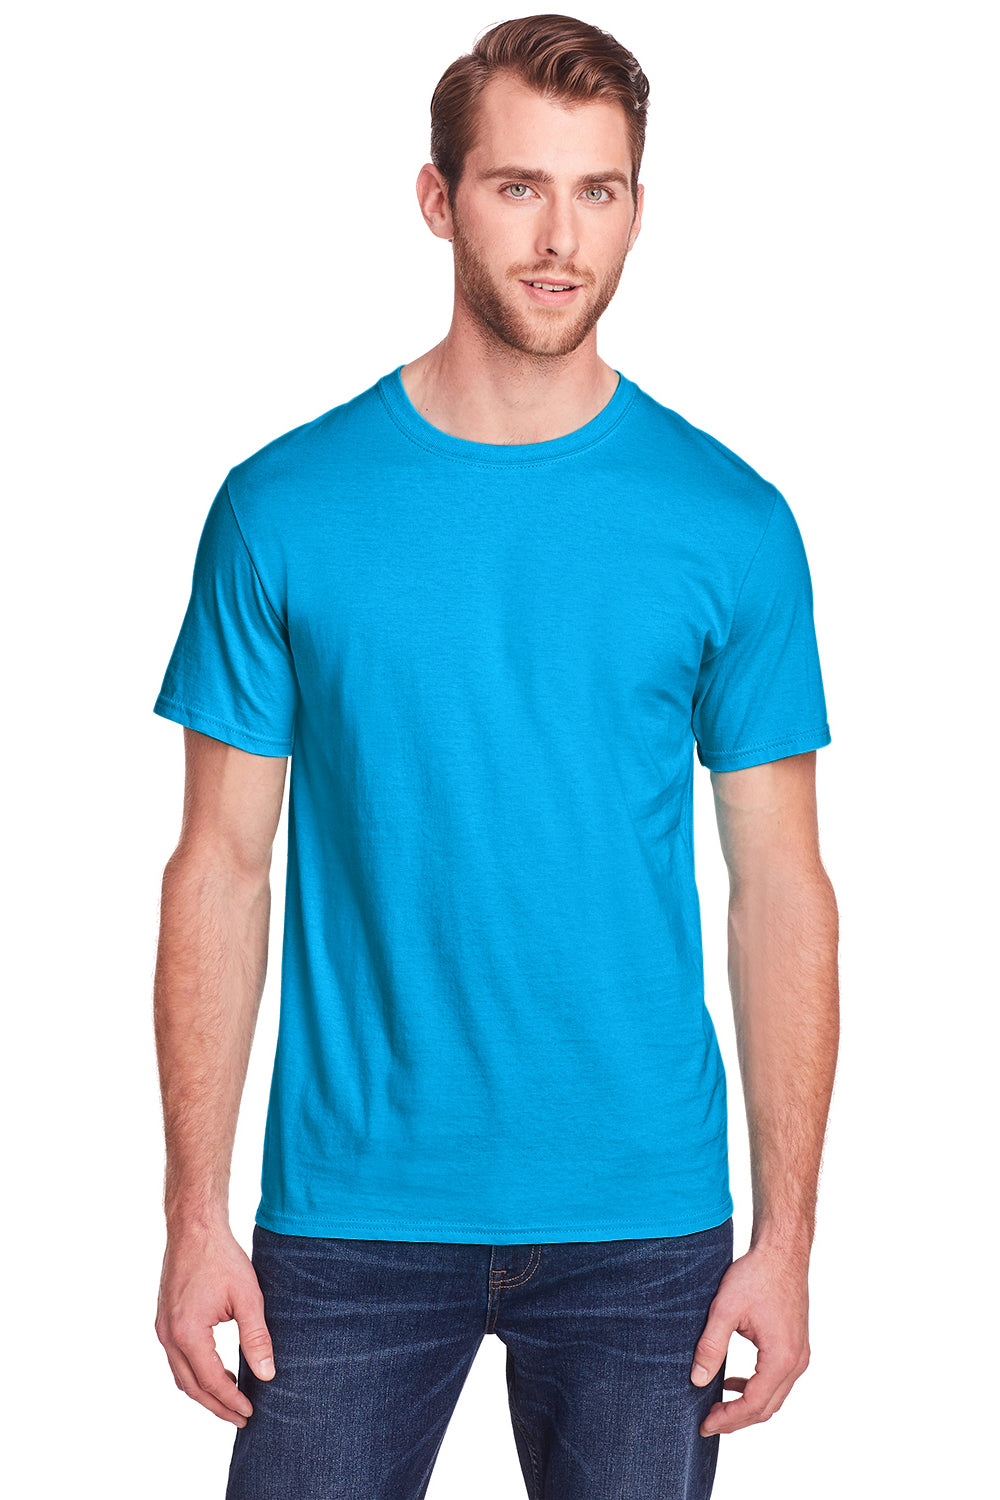 Fruit Of The Loom IC47MR Mens Pacific Blue Iconic Short Sleeve Crewneck T- Shirt —